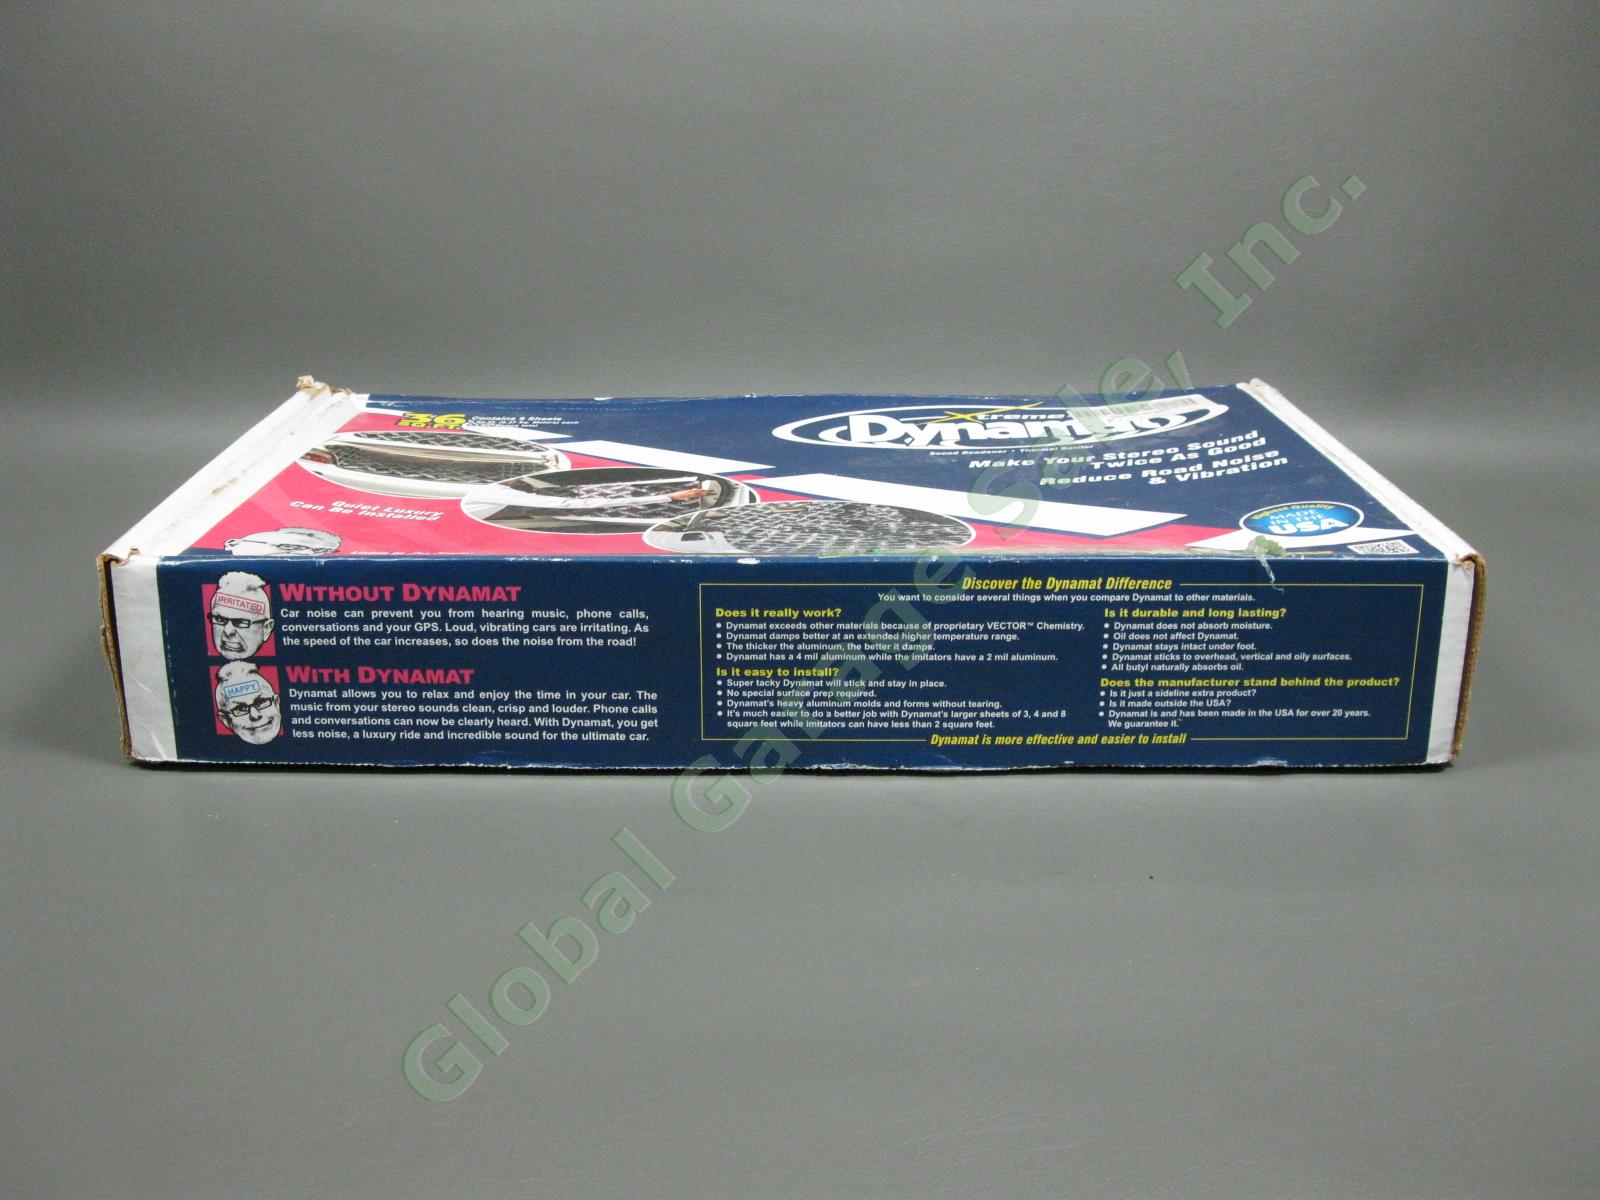 NEW Dynamat Xtreme 10455 Sound Deadener 18"x32" Self-Adhesive Thermal Barrier NR 1